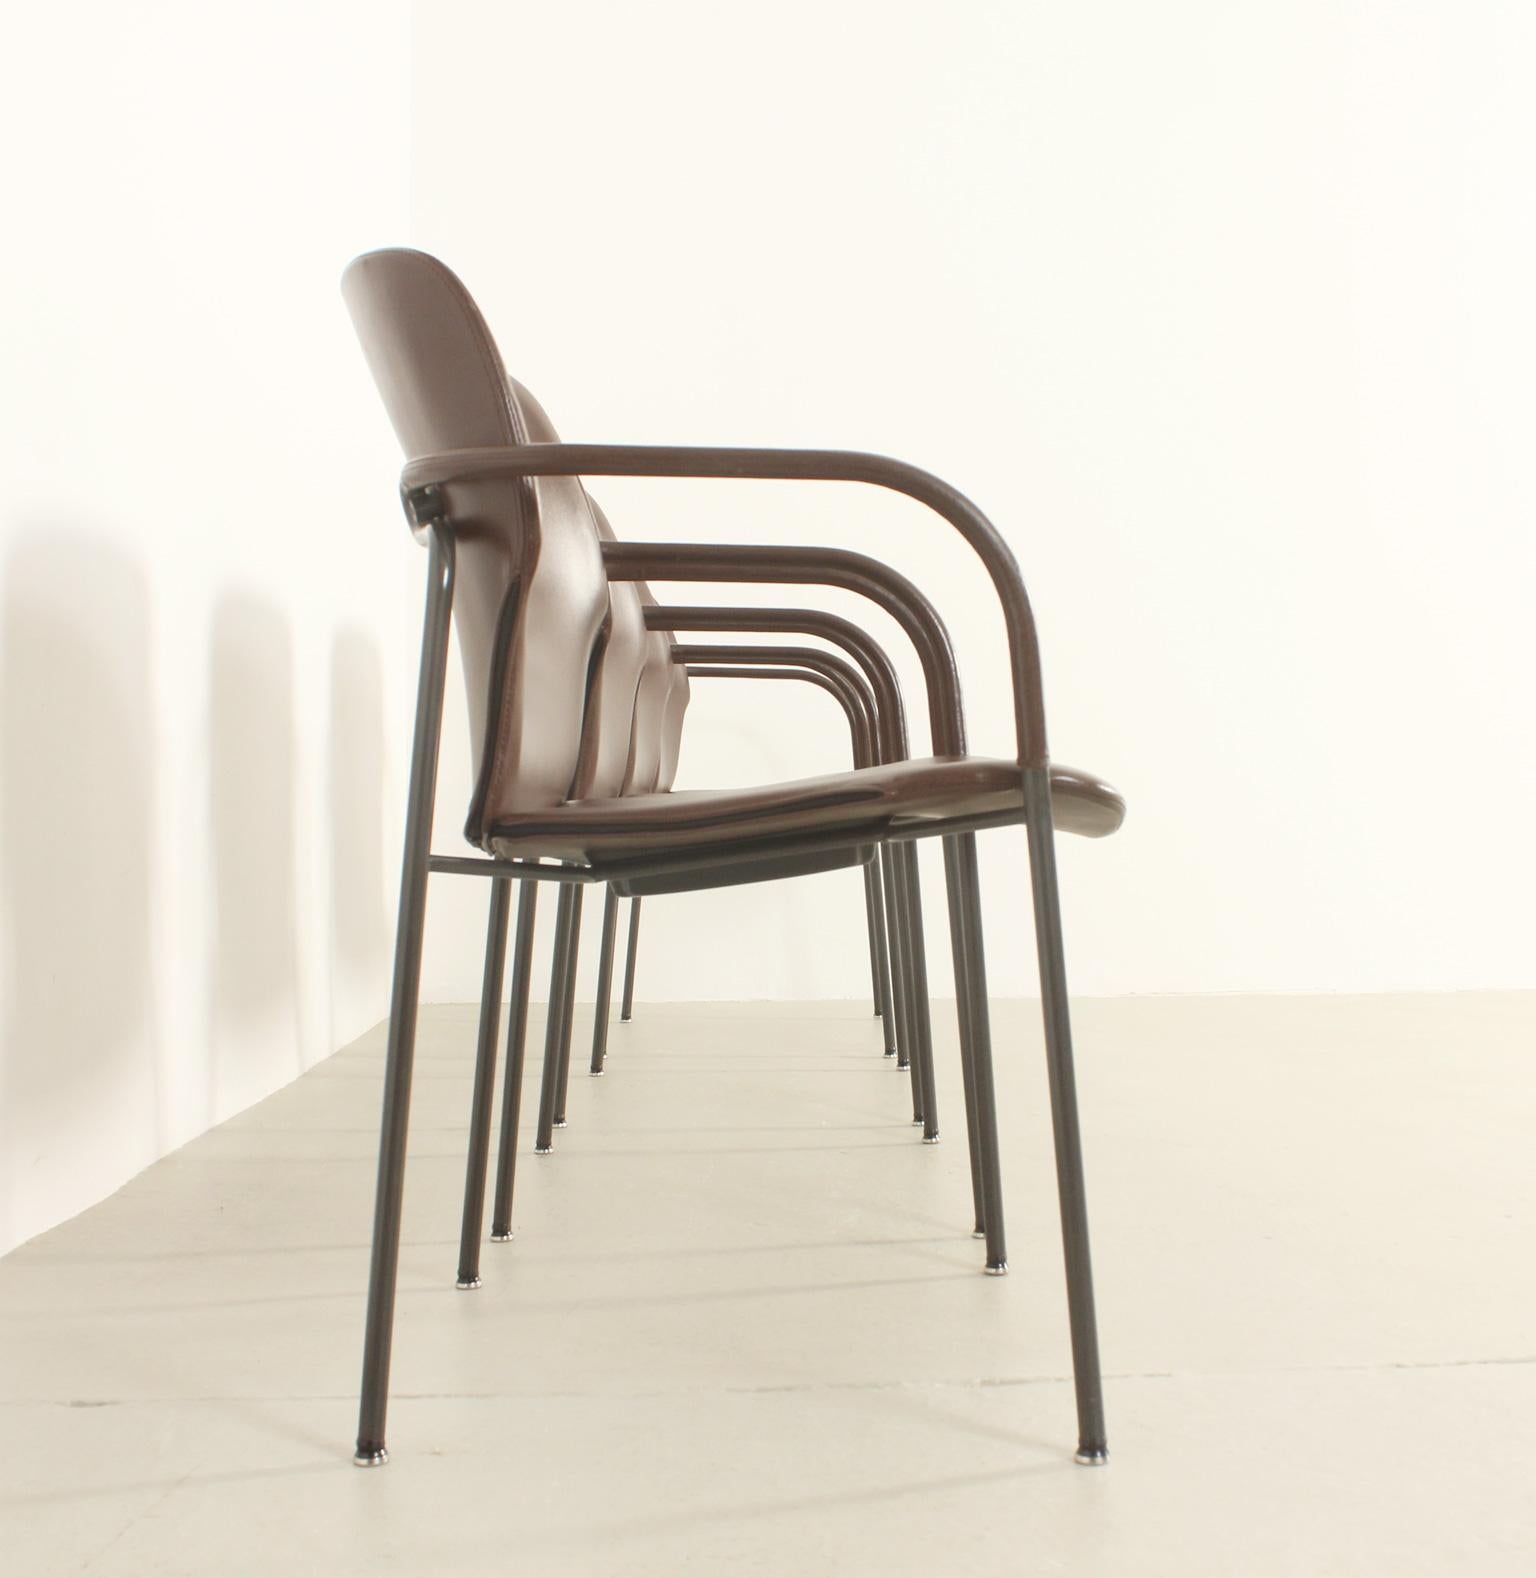 Metal Four Leather Lalanda Chairs by Gianfranco Frattini, 1980's For Sale